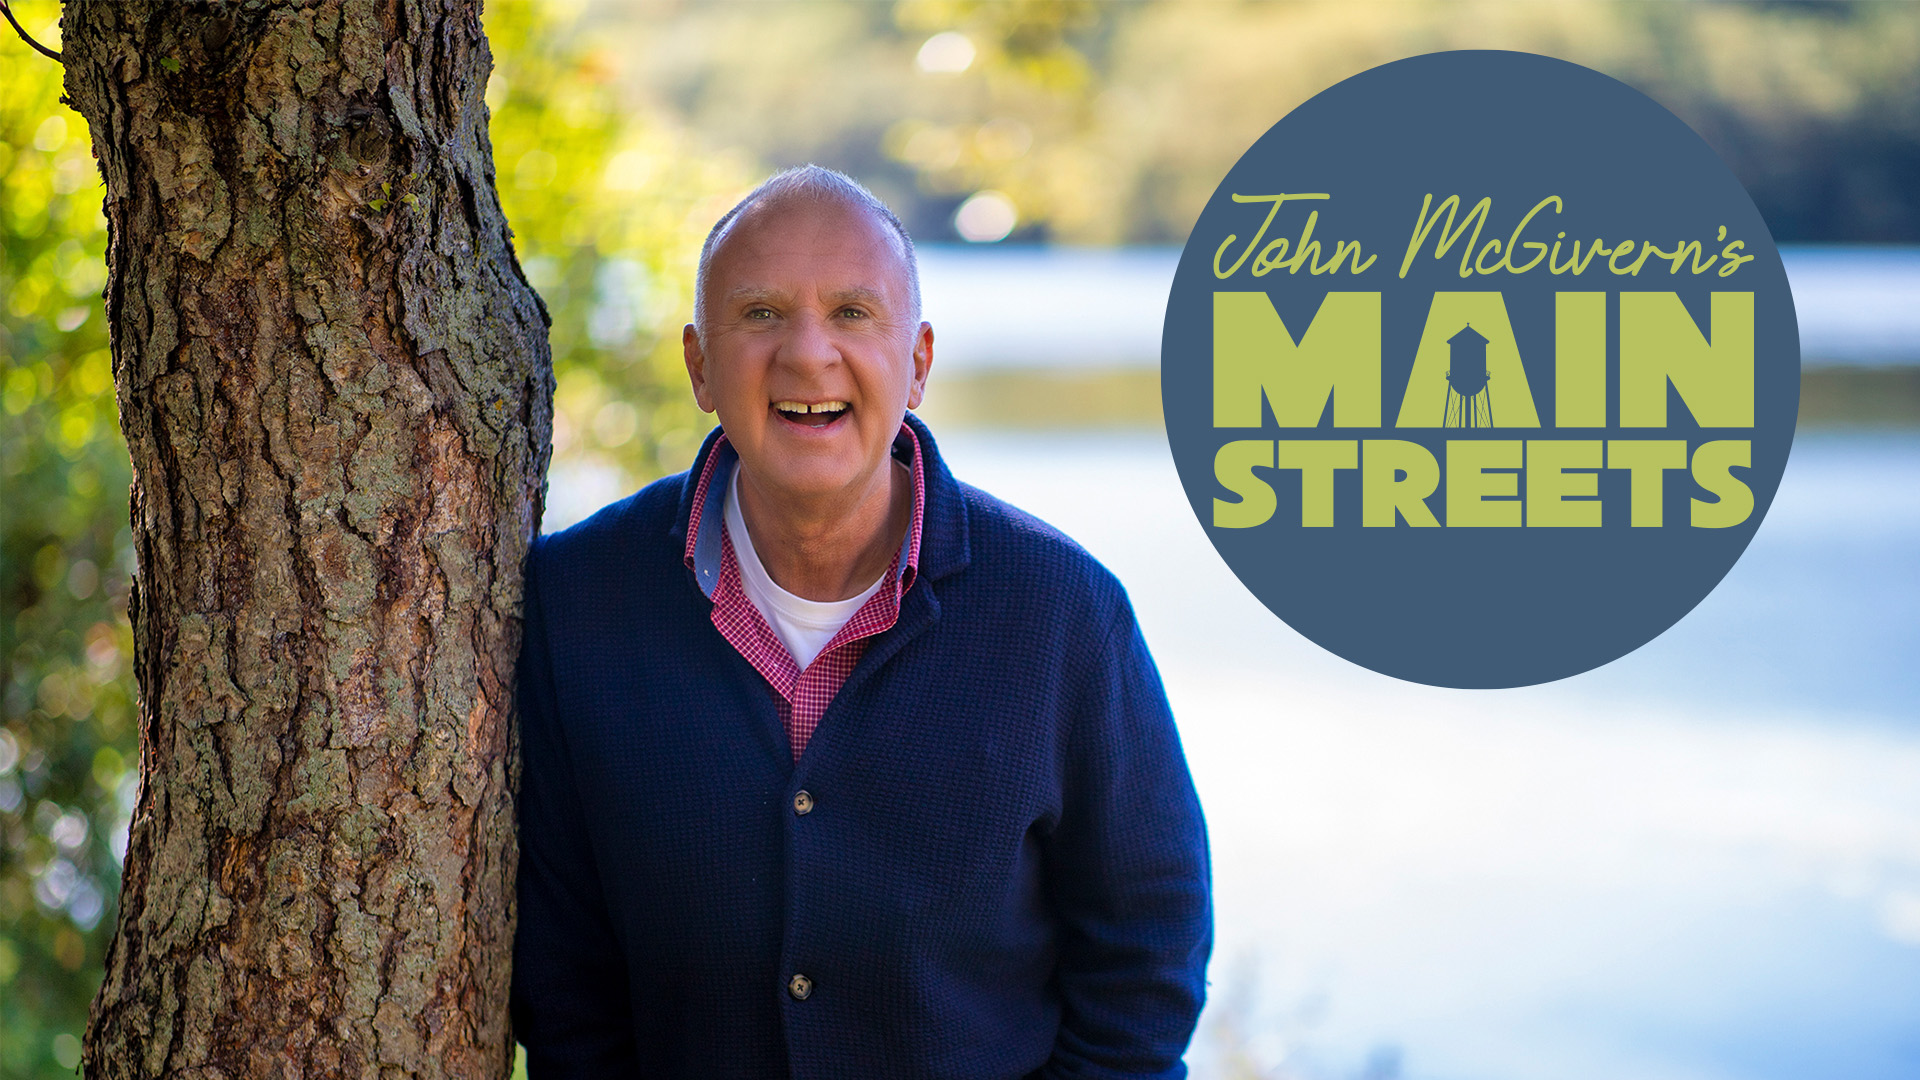 John McGivern standing next to a tree and Main Streets show logo.